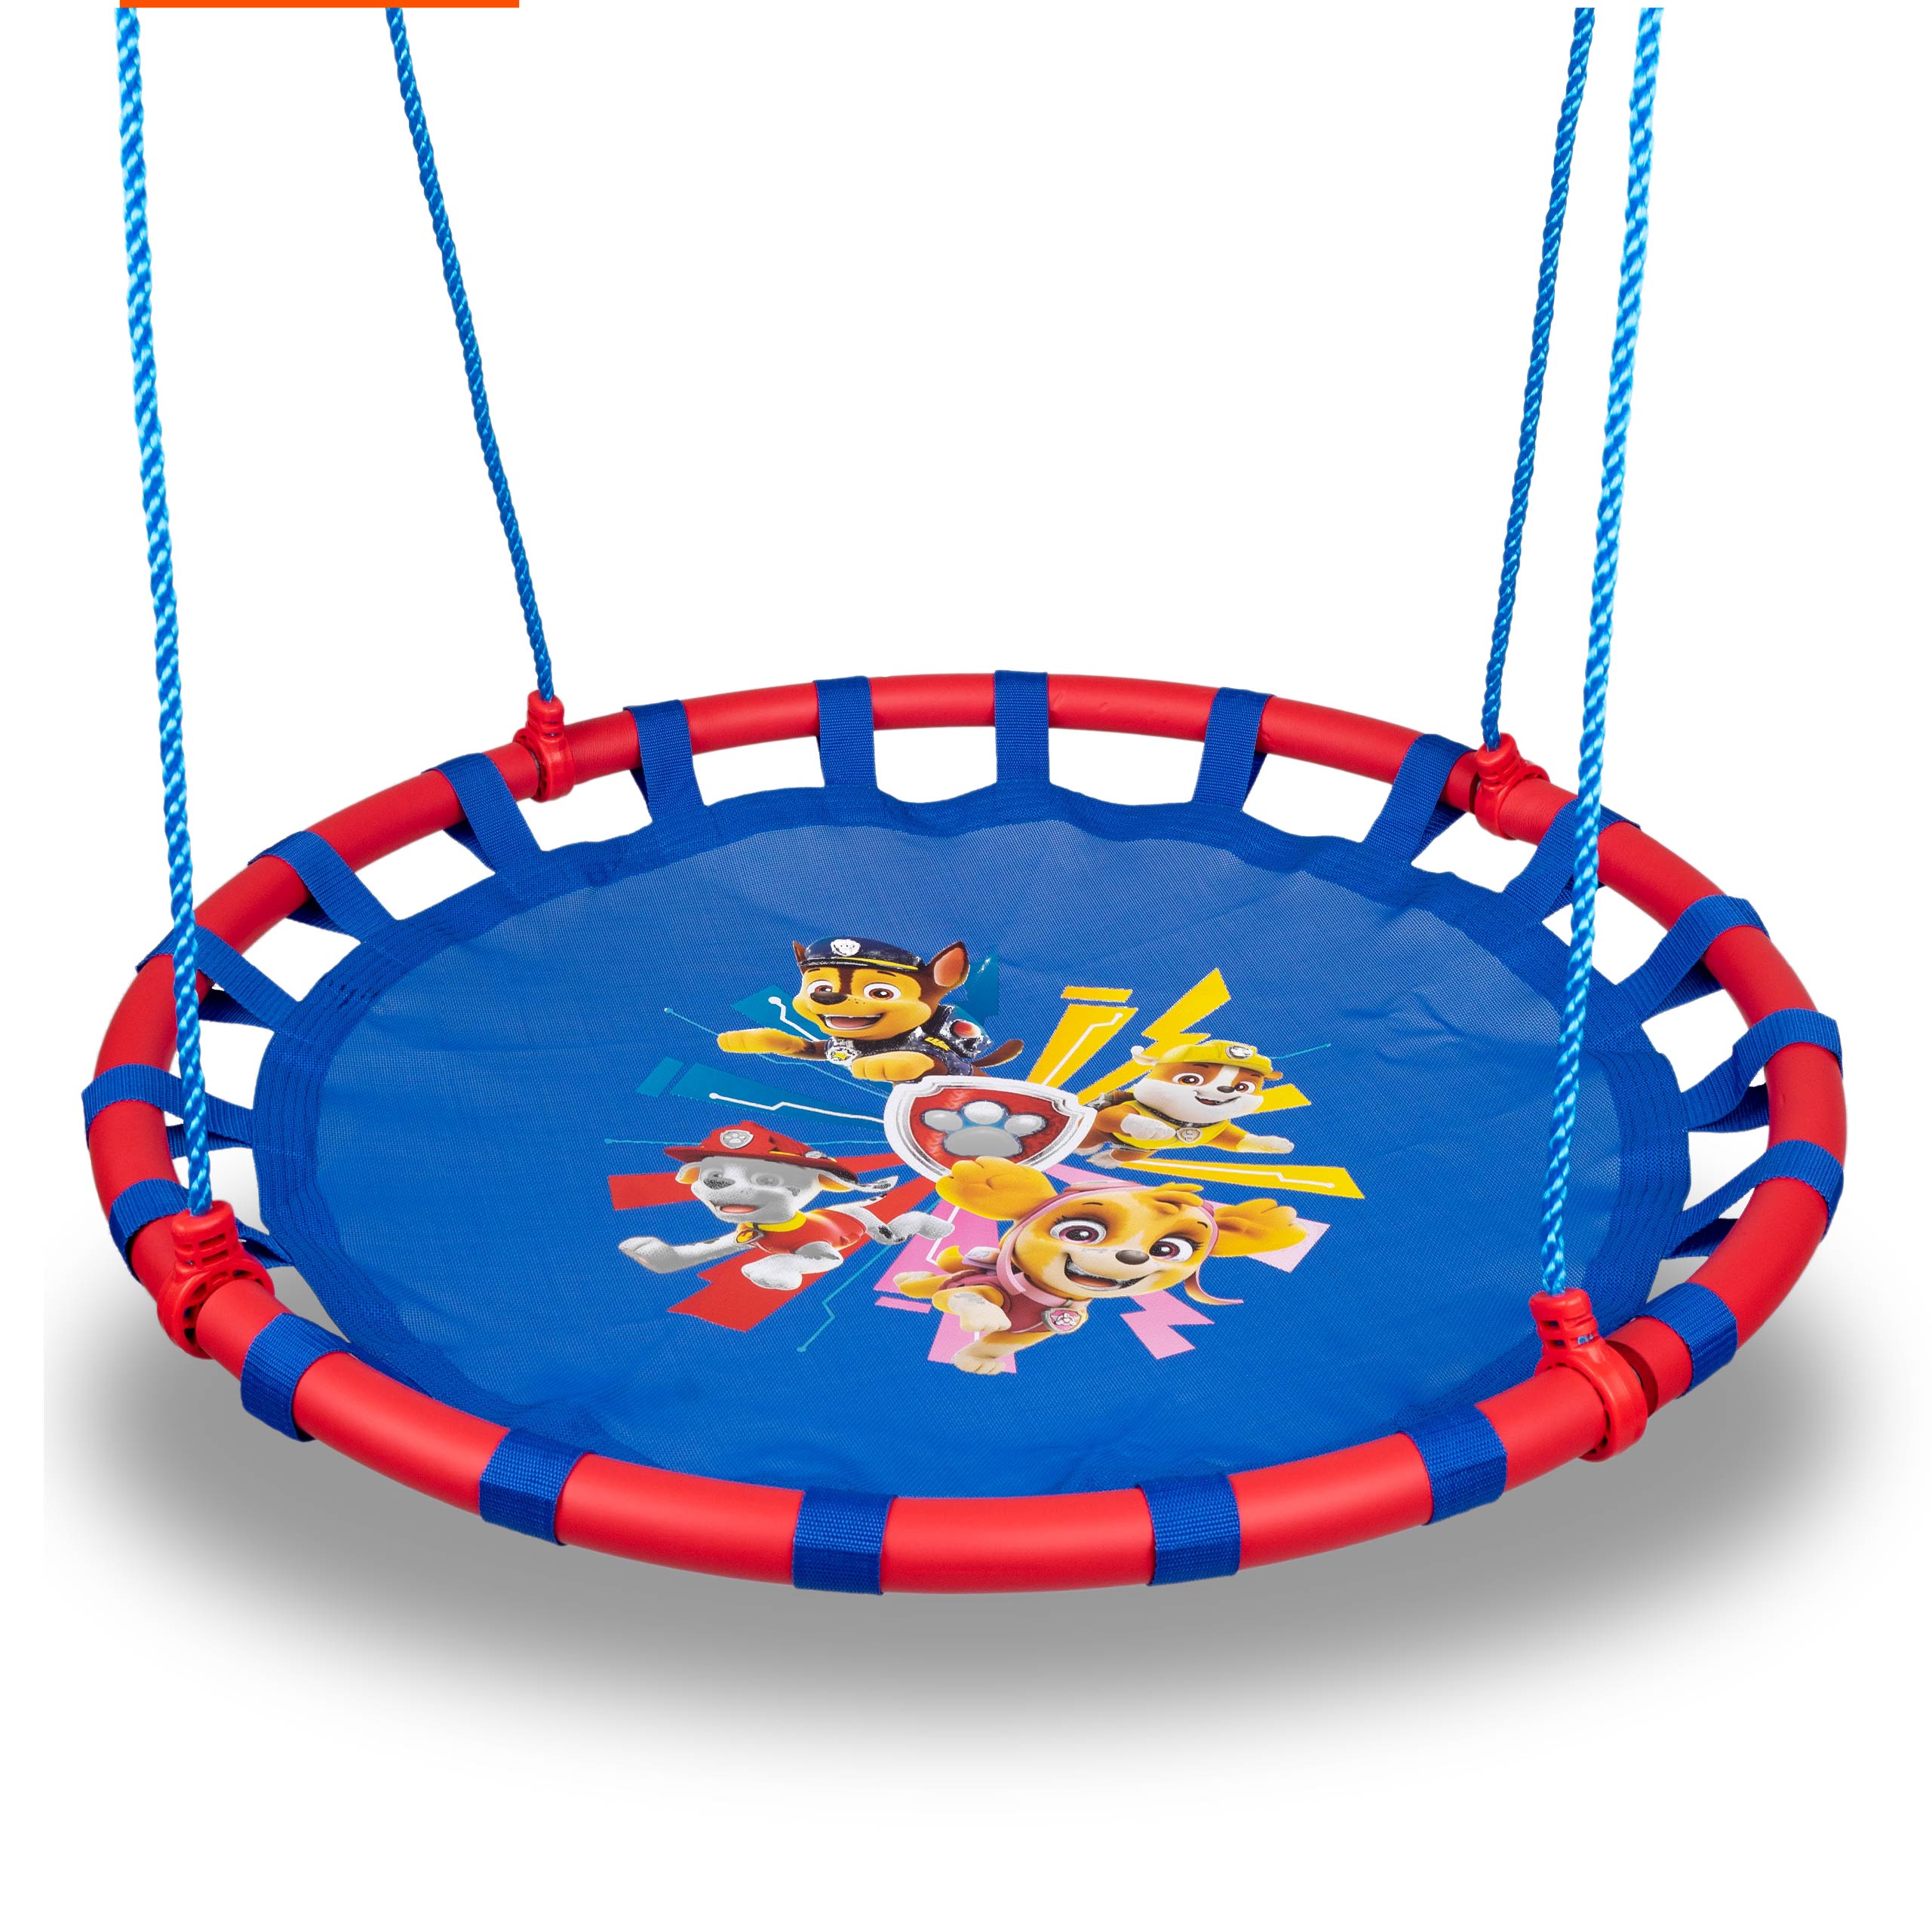 Paw Patrol 24" and 40" Saucer Tree Swings, Ages 3+